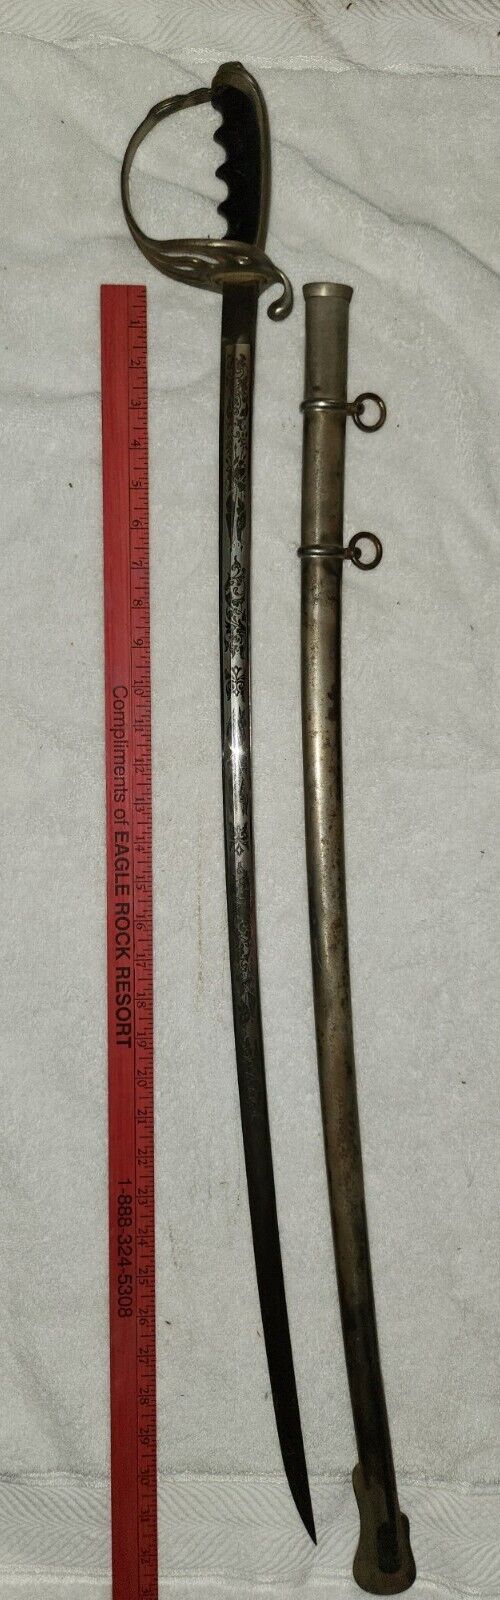 WWI WW2 1902 Army Officers Etched Sword w/Scabbard Pittston PA Maker Marked 1944